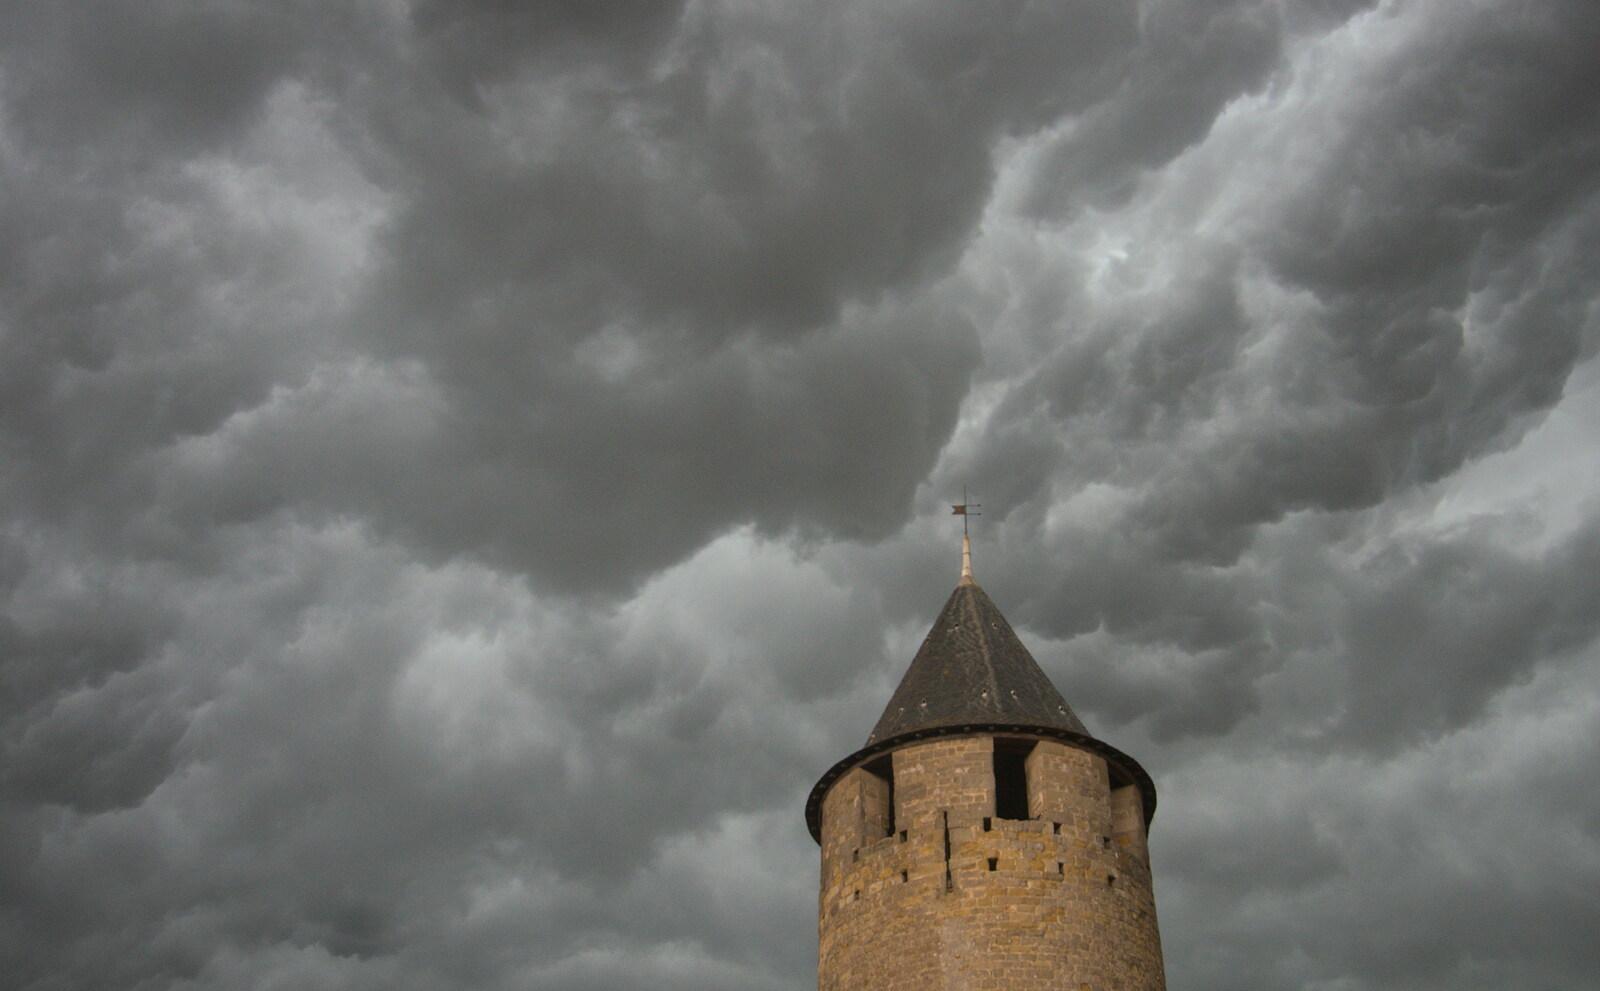 End-of-the-world clouds gather over the Château  from A Trip to Carcassonne, Aude, France - 8th August 2018